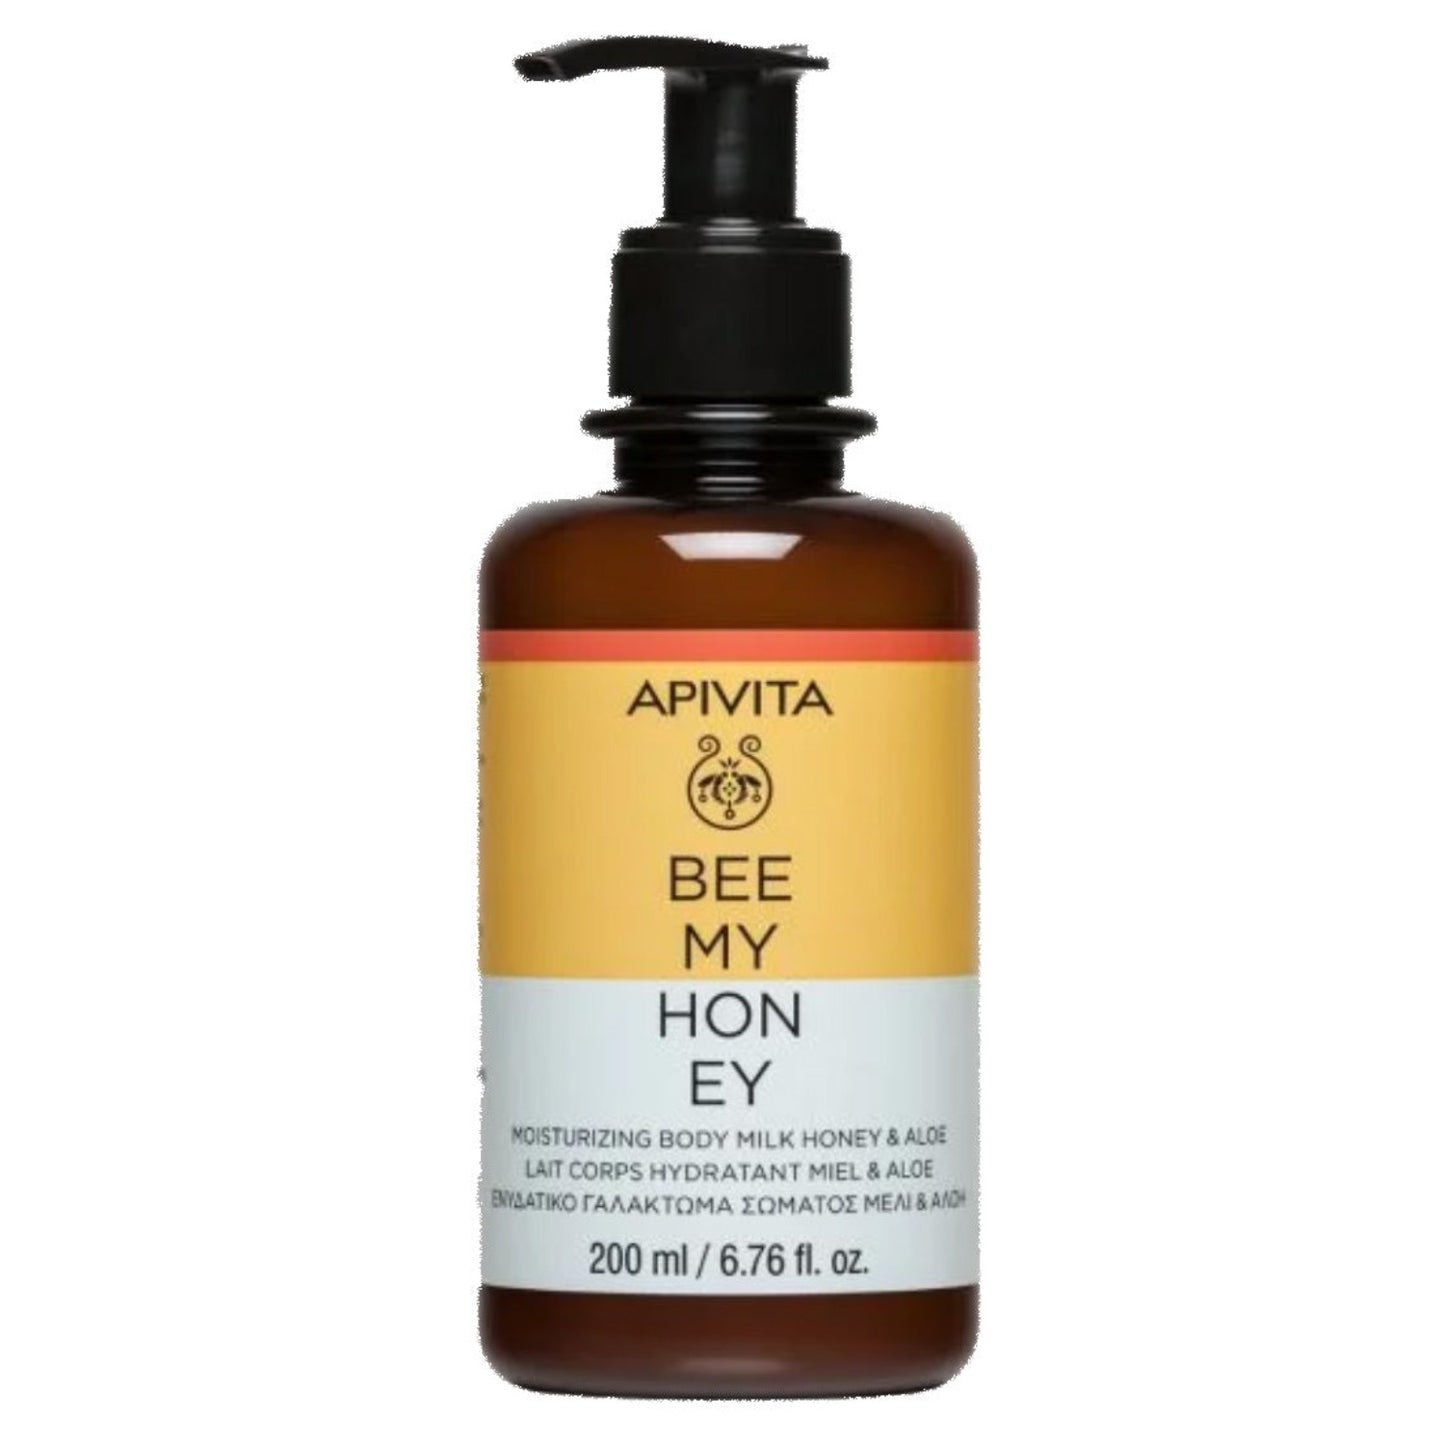 Apivita Bee my Honey Body Milk with Honey & Aloe features nourishing beeswax and shea butter, plus uplifting citrus notes that will improve your mood. Suitable for both men and women.